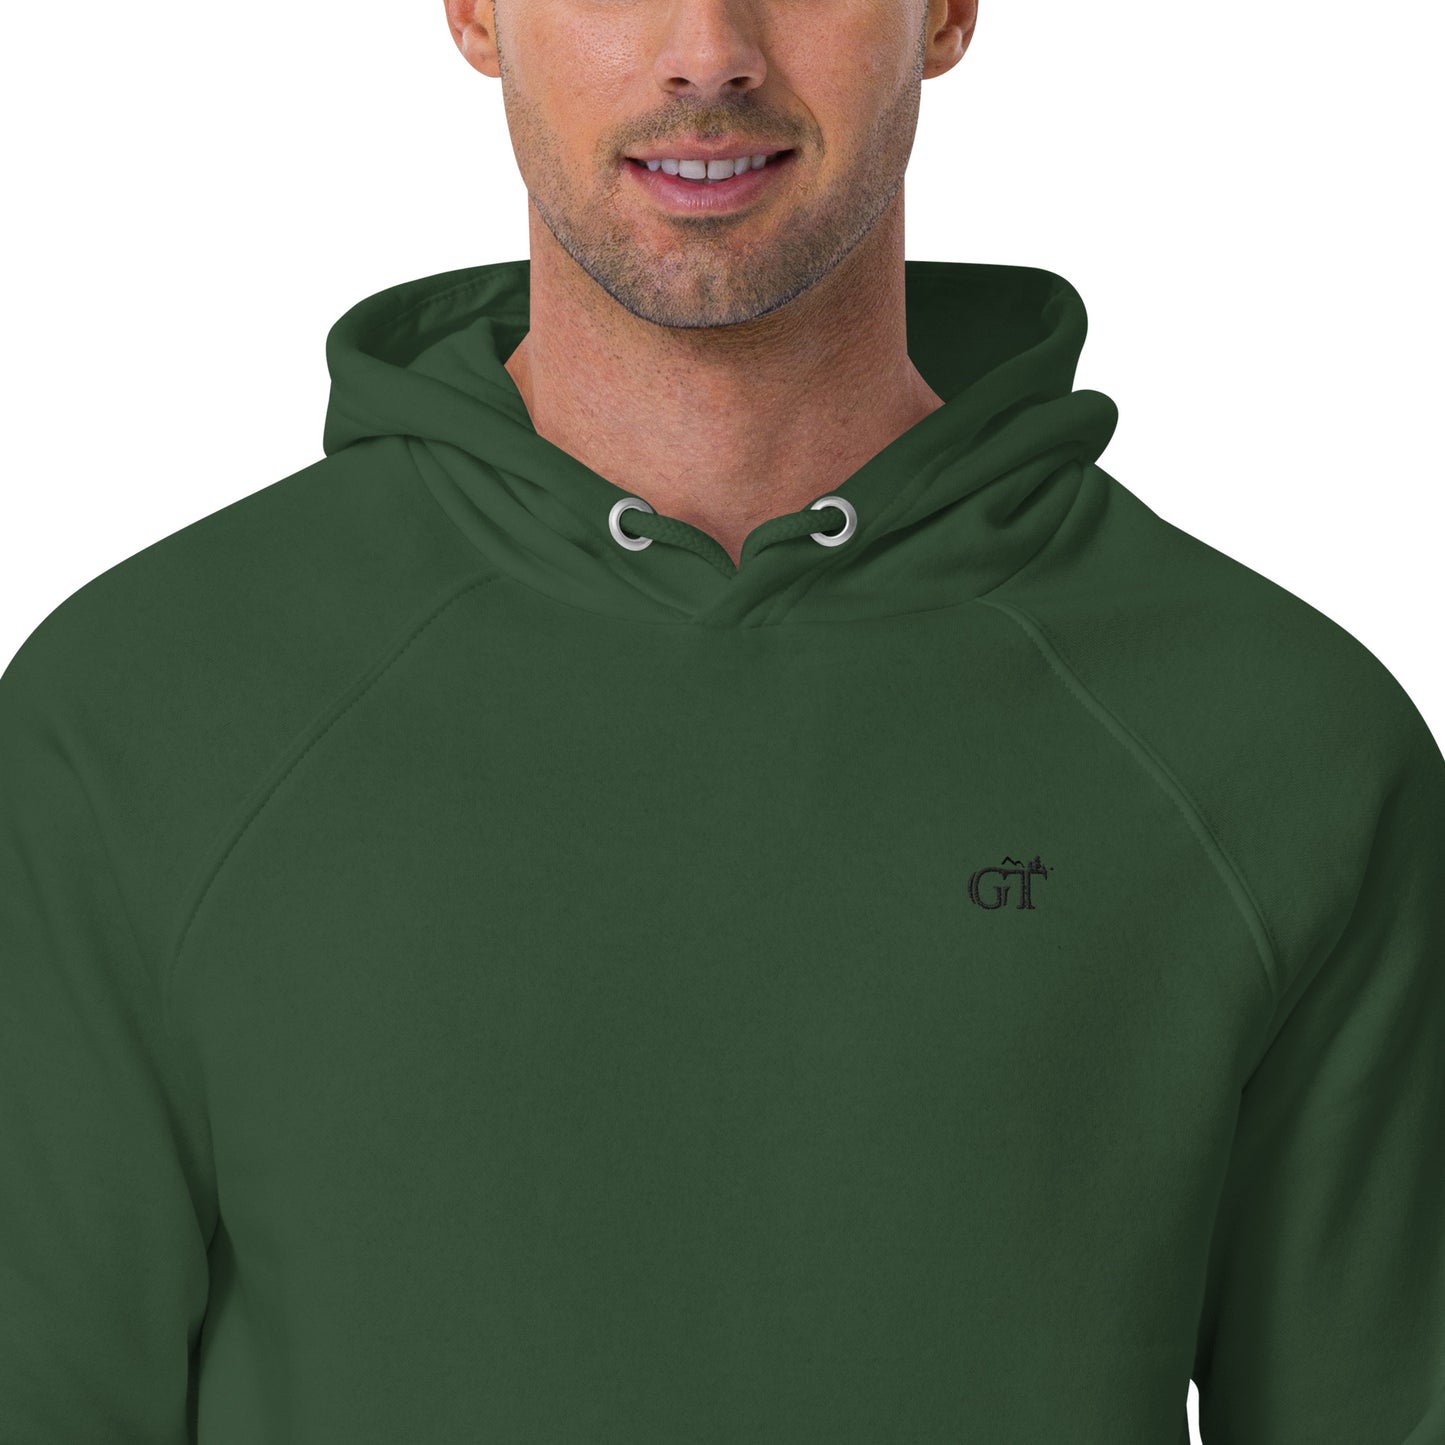 GT Eco Embroidered Organic Men's Hoodie